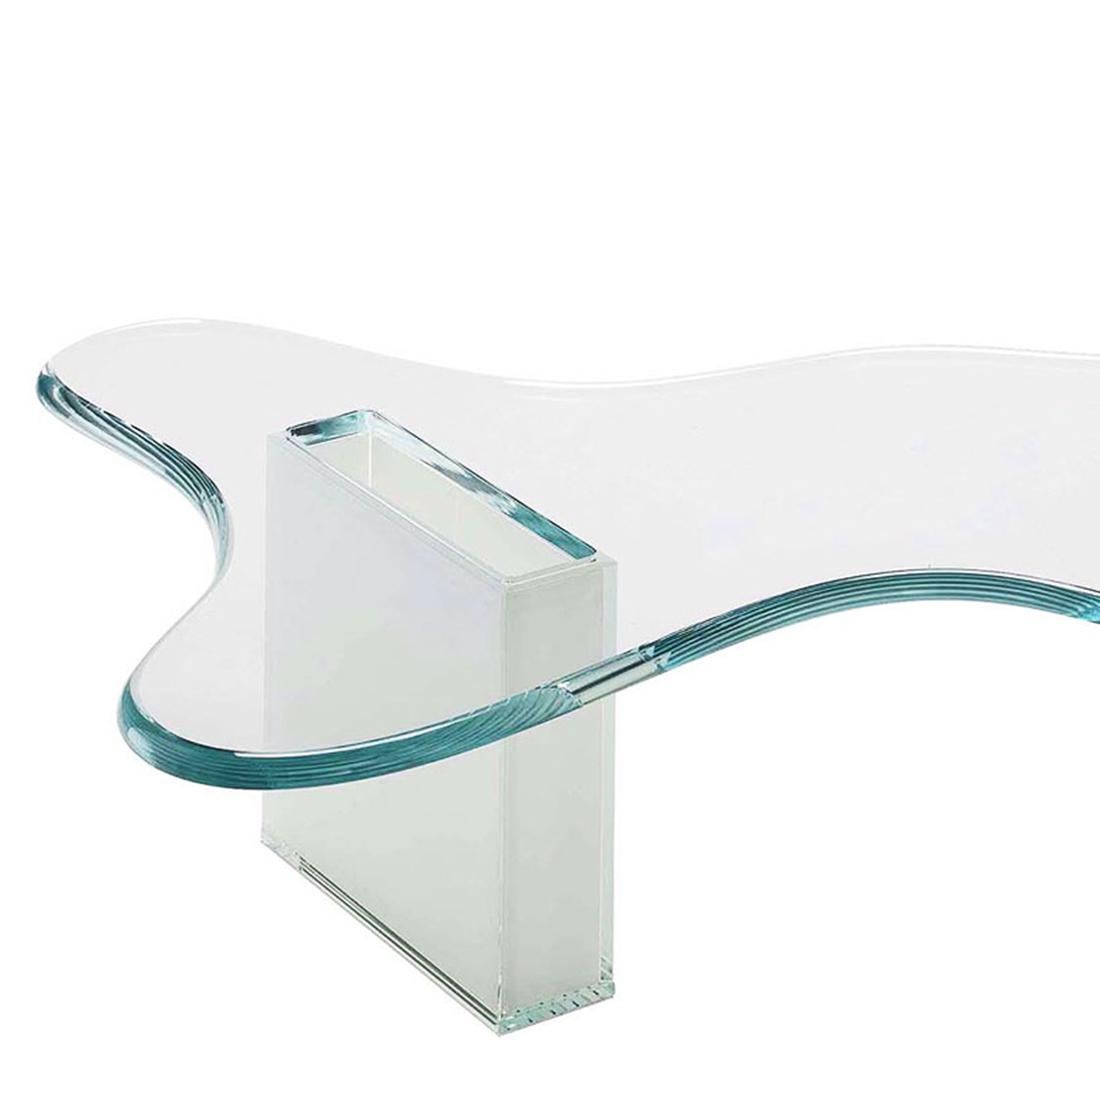 Coffee table sparkle white XL with clear glass top, 
with rounded edges 20mm thickness. With 2 glass 
box bases in white glass, with edges of 12mm thickness.
L140xD83xH33cm, price: 4450,00€.
Also available in L107xD87xH33cm, price: 4300,00€
Also